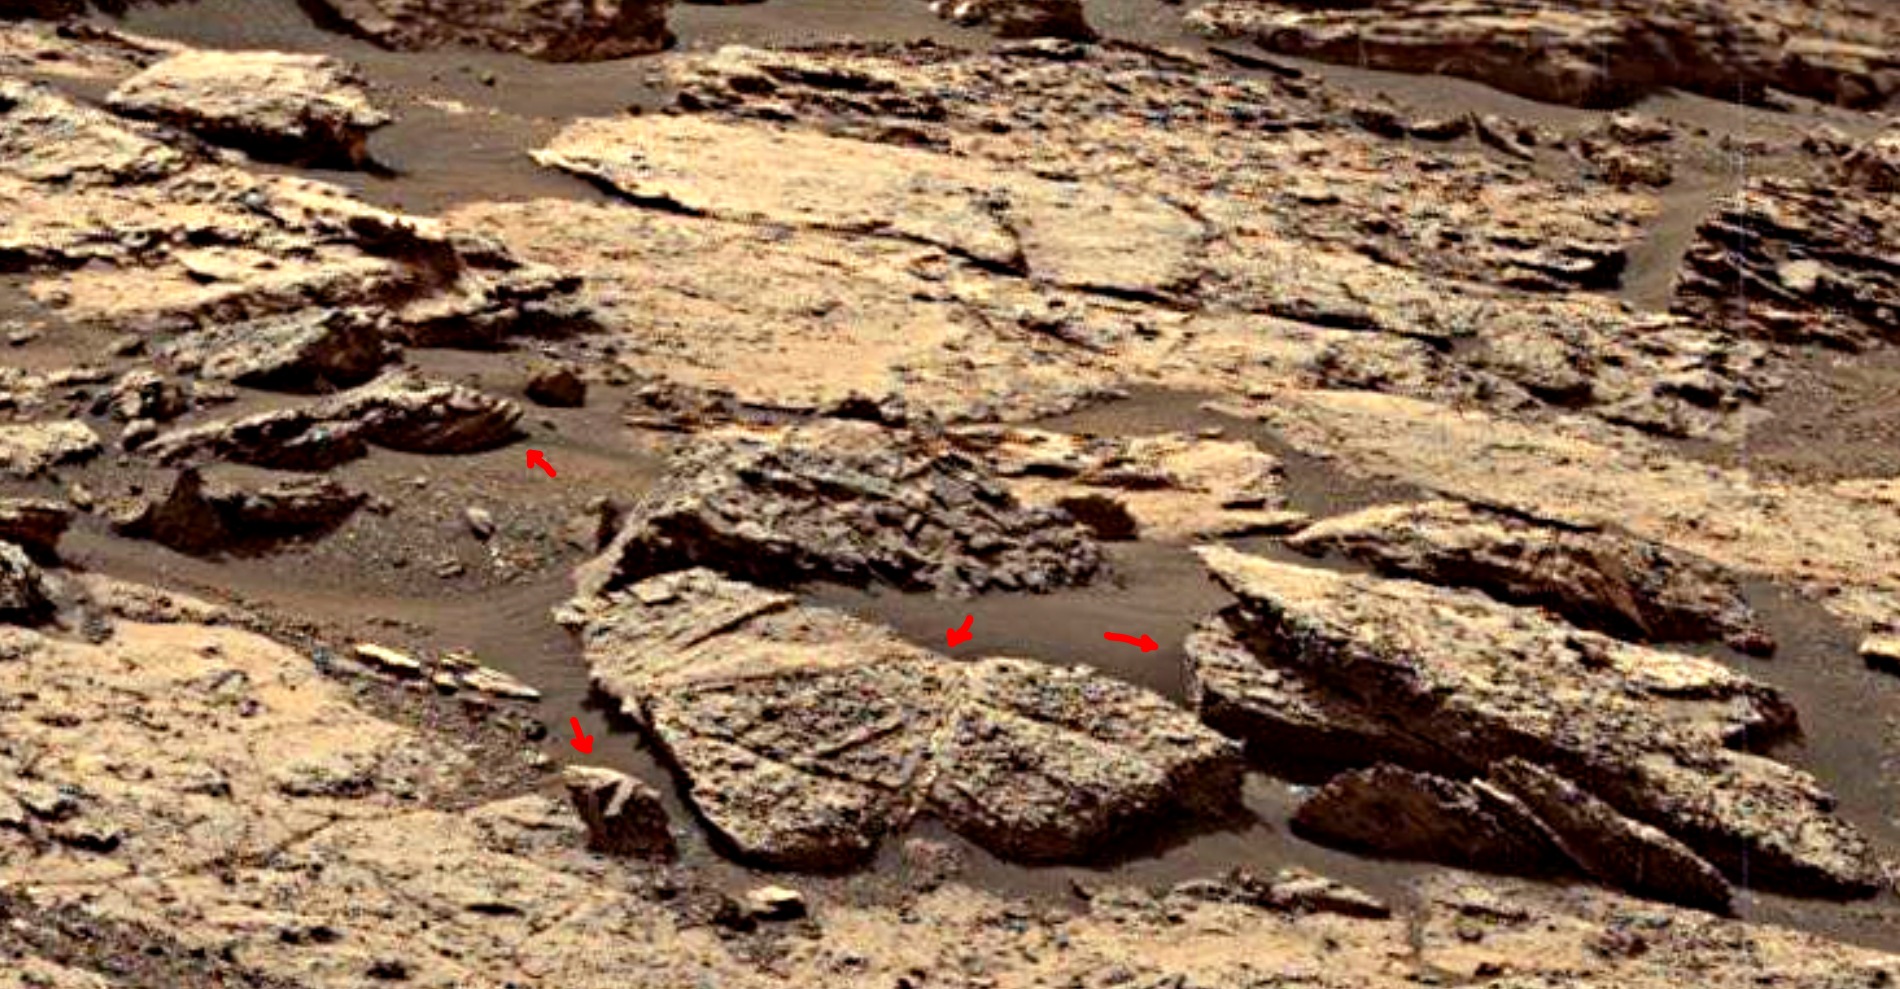 mars-sol-1485-anomaly-artifacts-10-was-life-on-mars